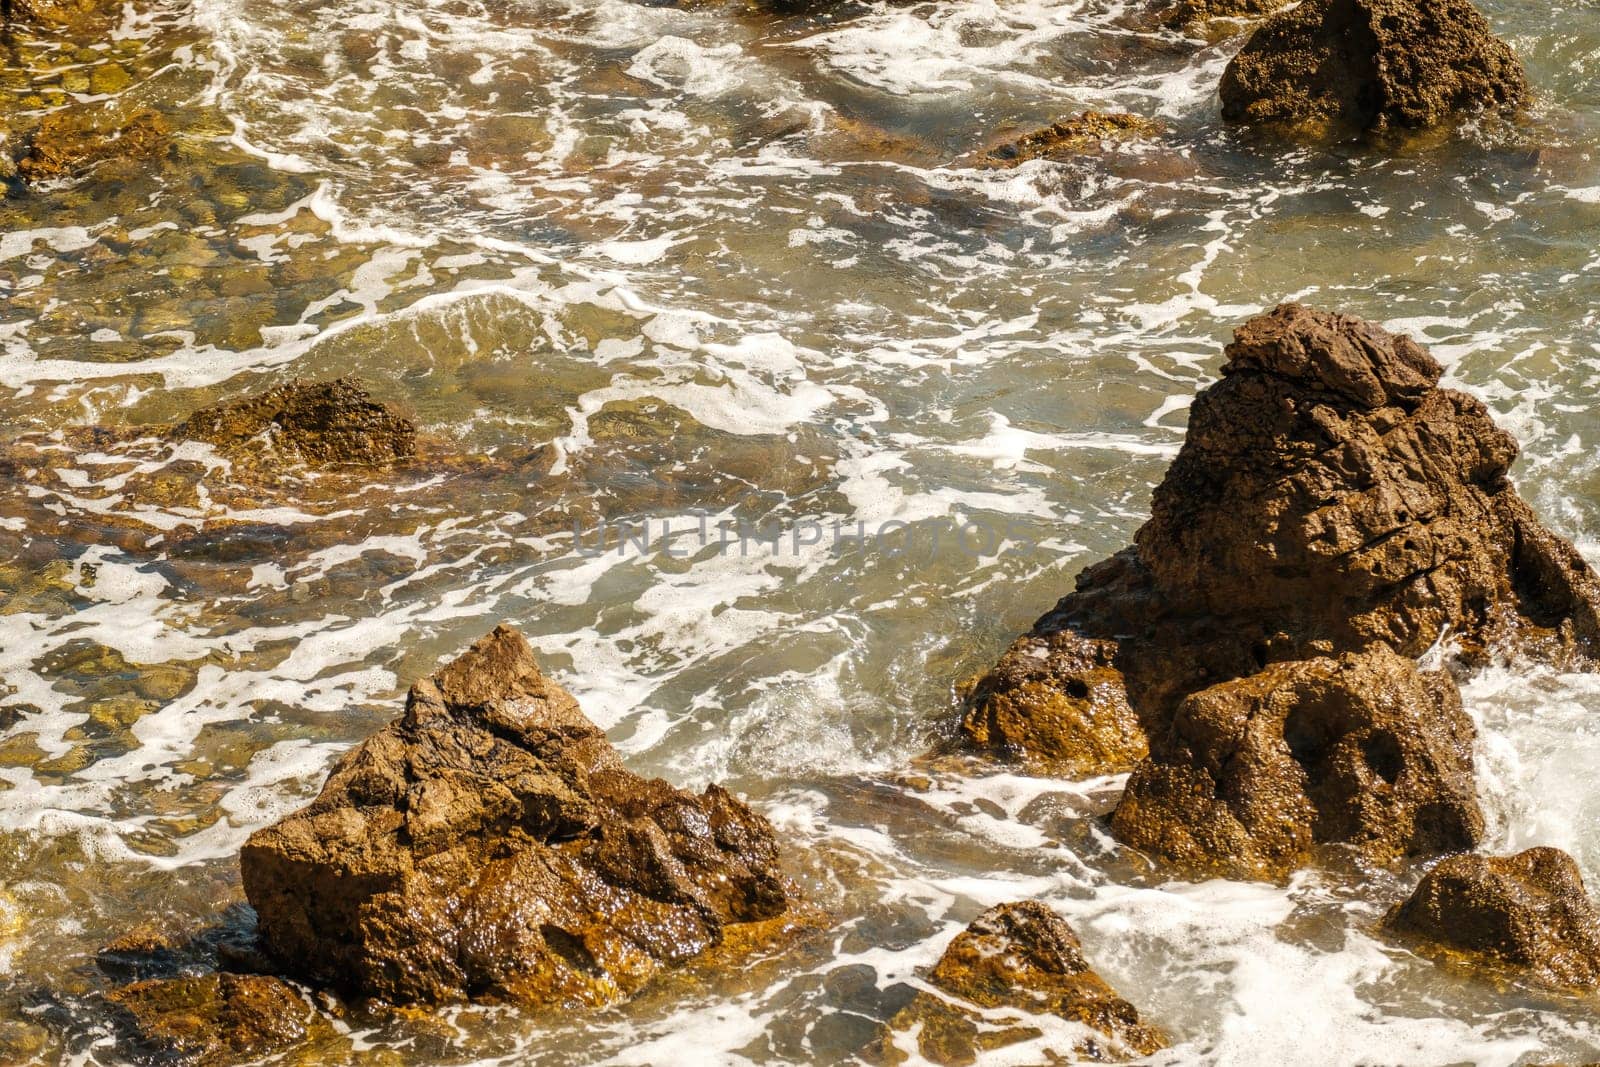 Small ocean waves crashing of rocks on shallow coastline at high tide at bright sunlight. Transparent waves create foams rolling on stones